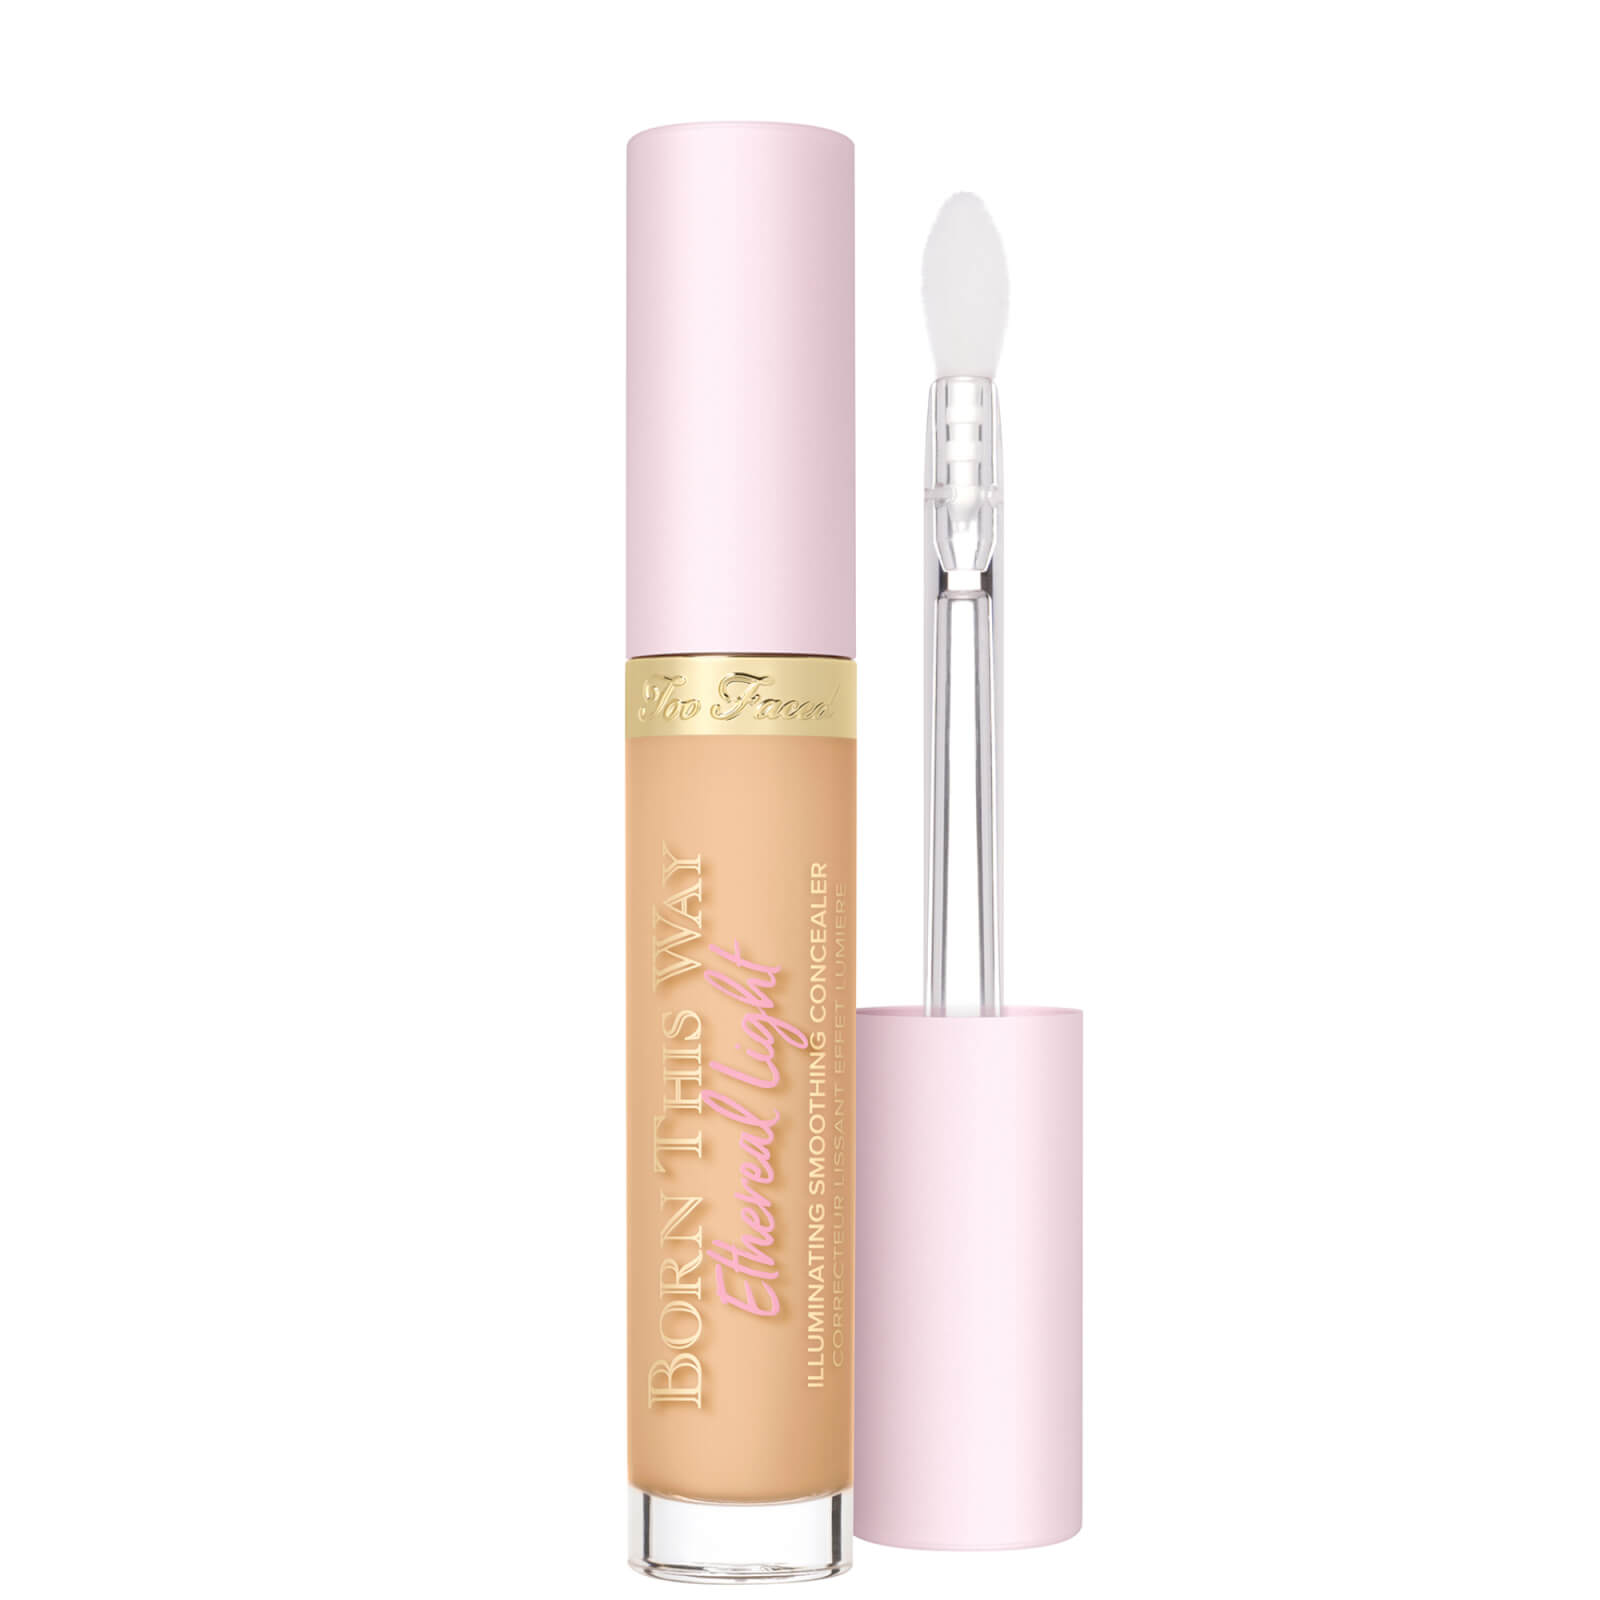 Too Faced Born This Way Ethereal Light Illuminating Smoothing Concealer 15ml (Various Shades) - Pecan